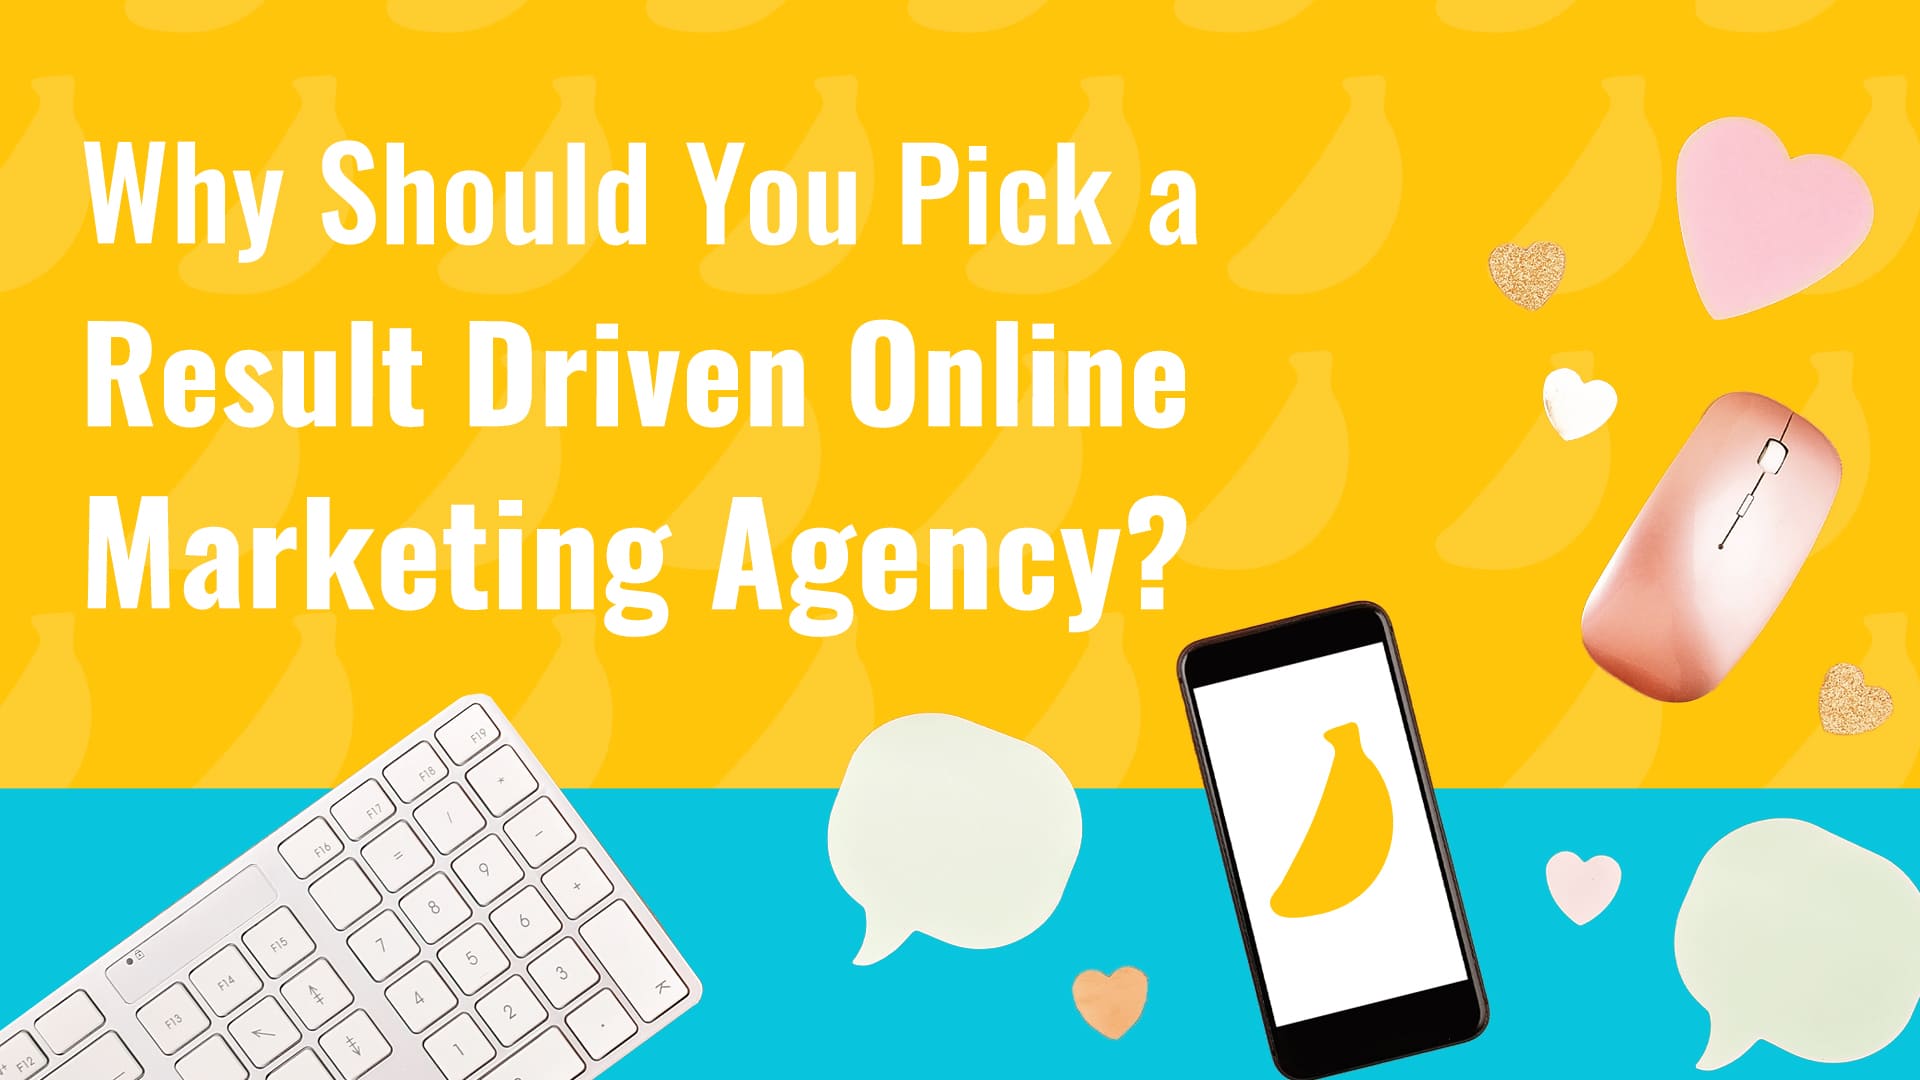 Learn why a Result Driven Online Marketing Agency is so important to the vetting process of choosing a digital agency.